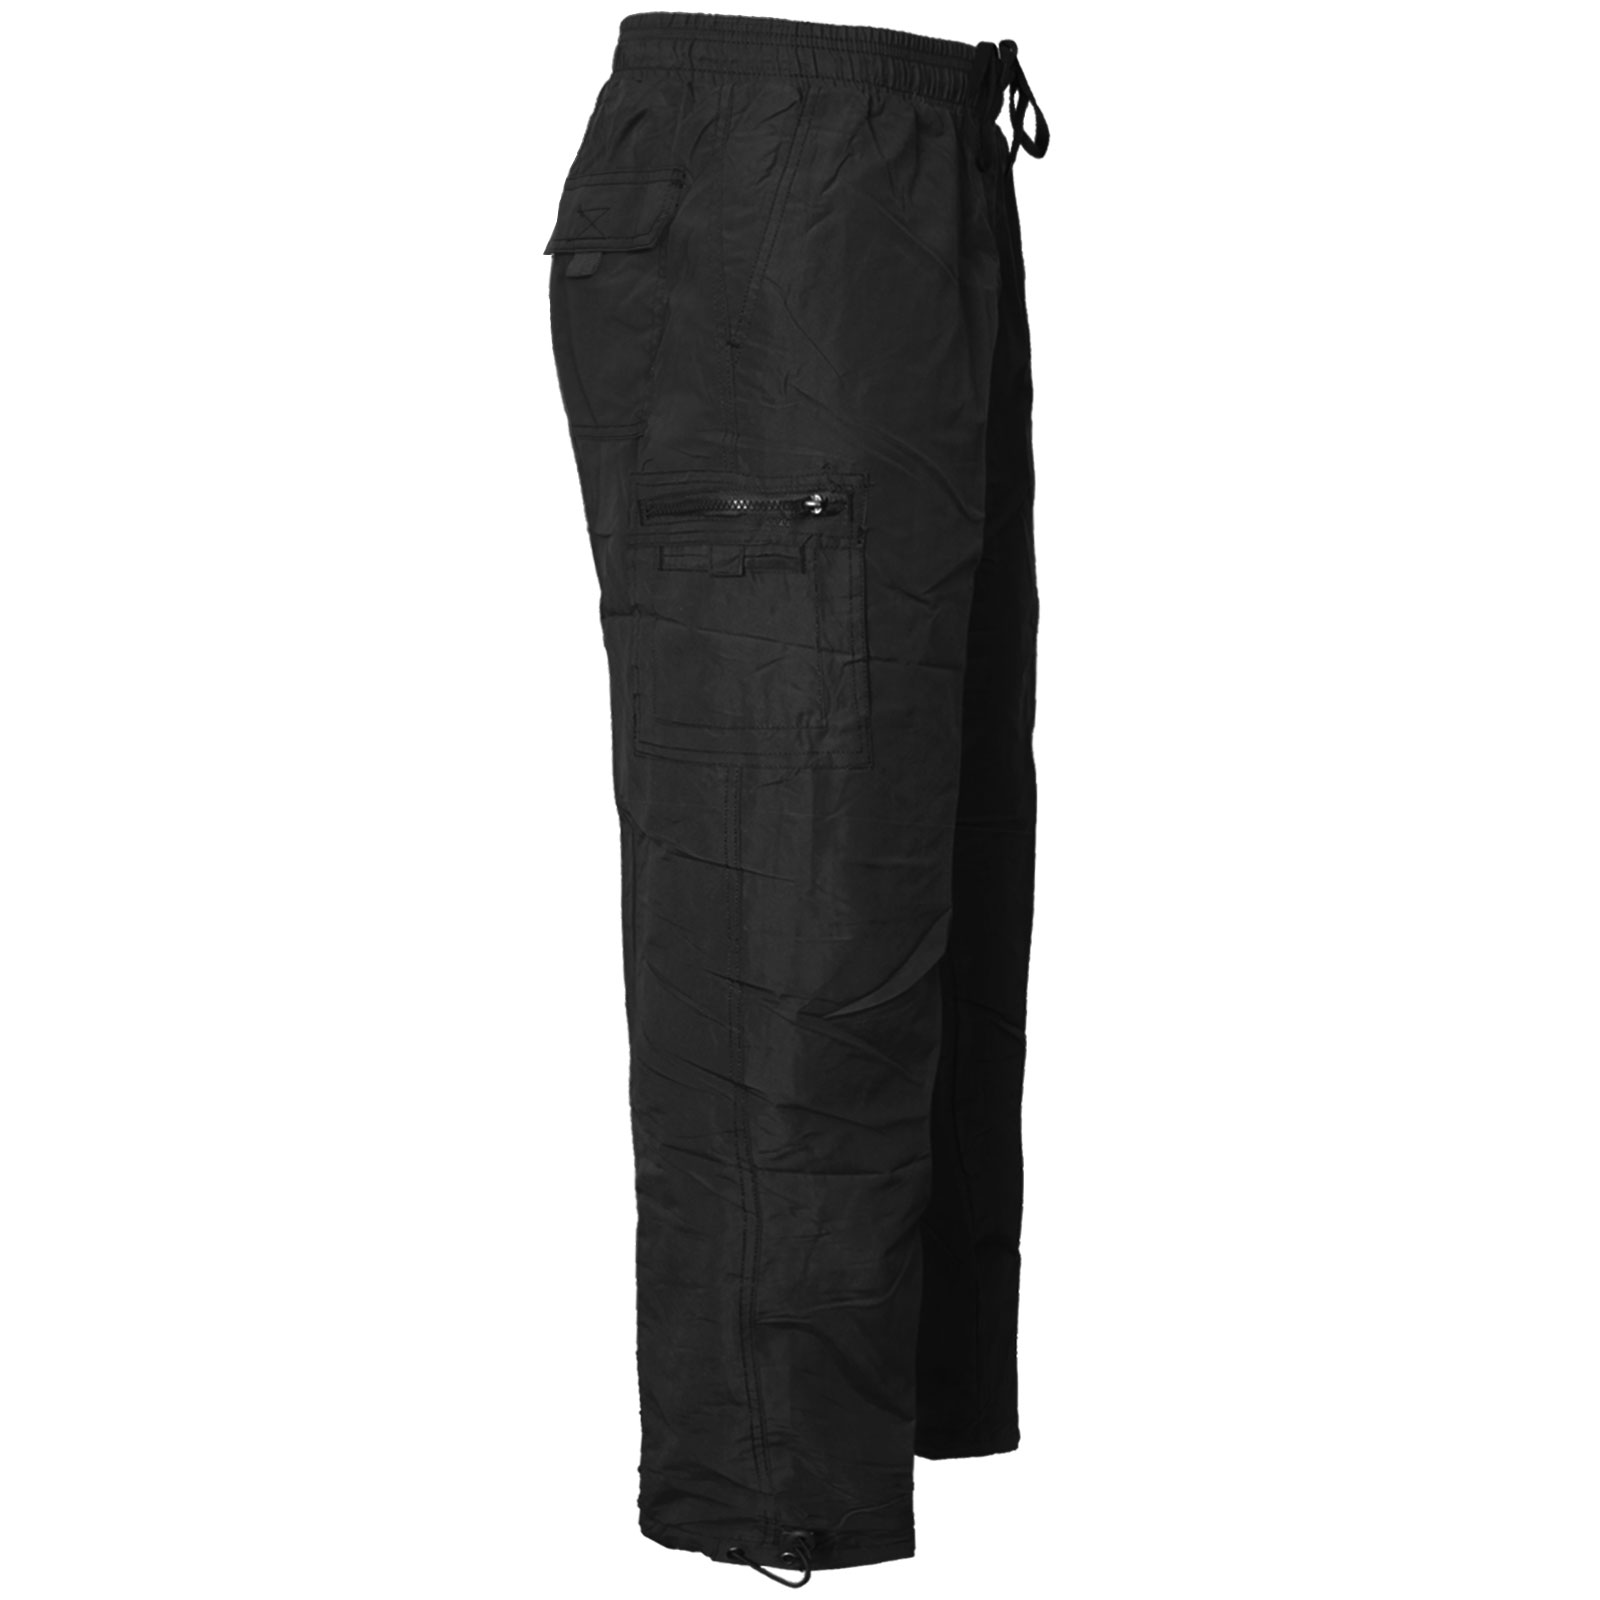 NEW MENS BLACK FLEECE LINED ELASTICATED THERMAL CARGO WARM CASUAL WORK TROUSERS